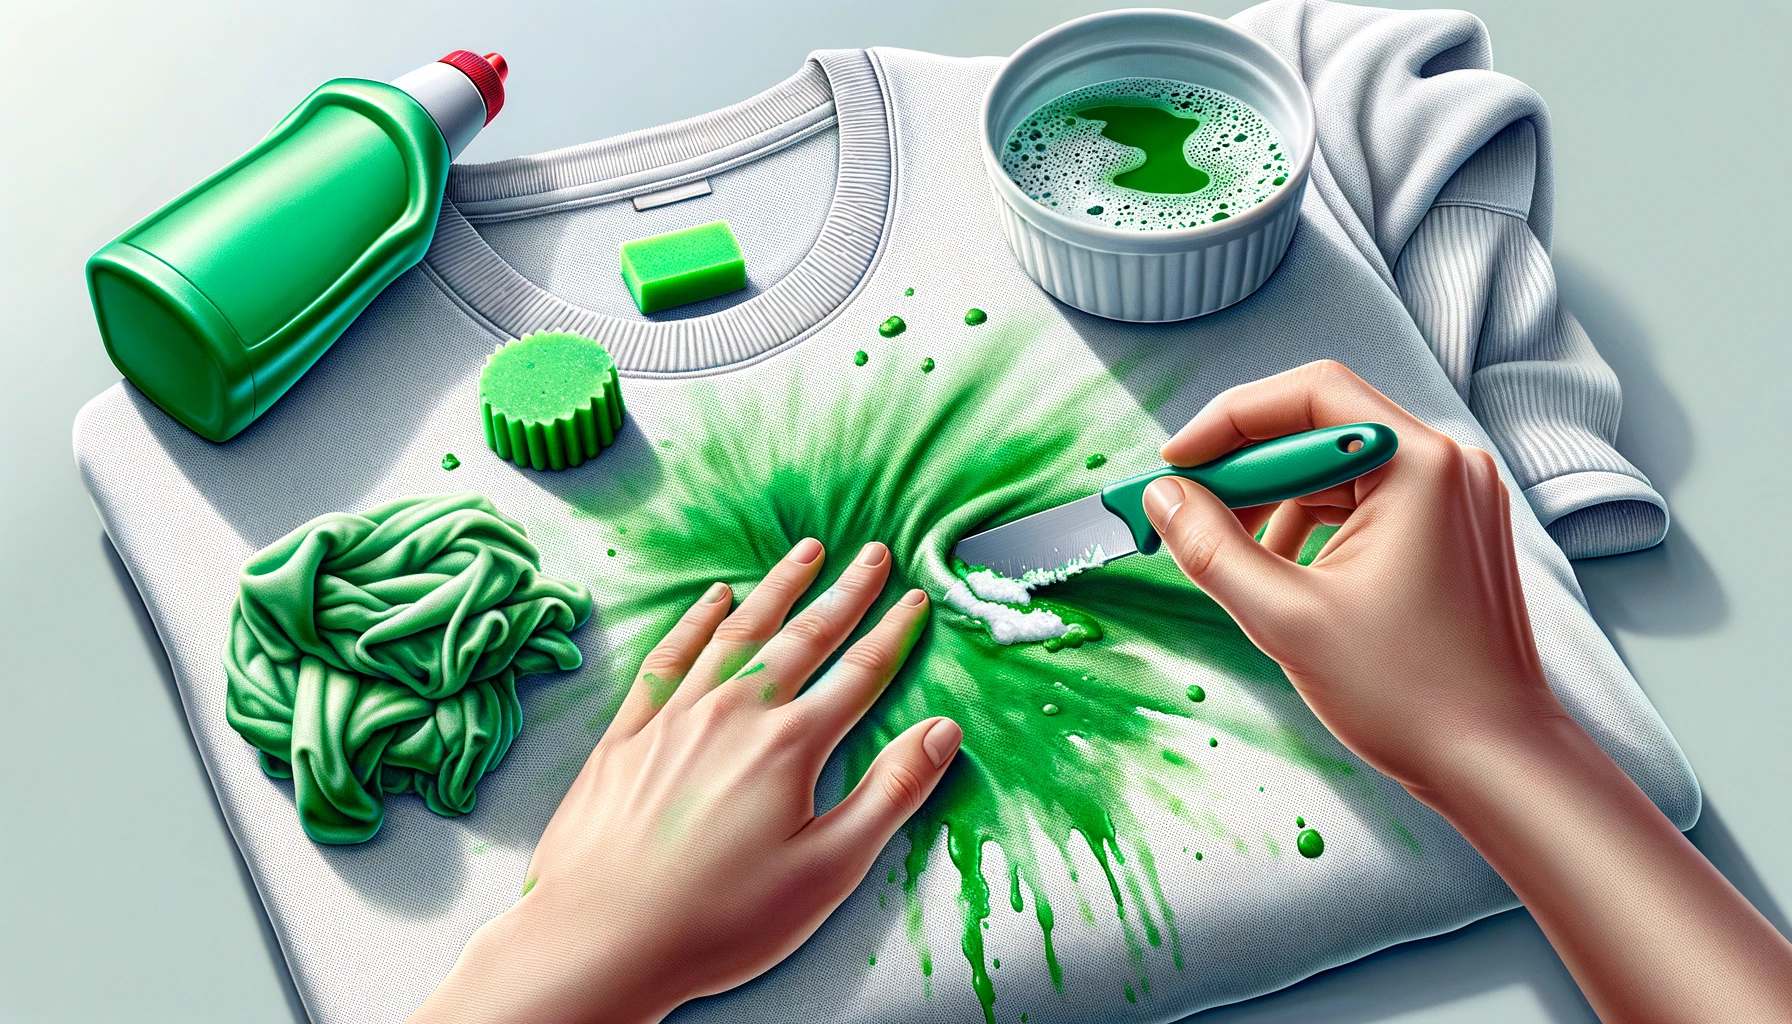 using a dull knife to remove green playdough from white clothing